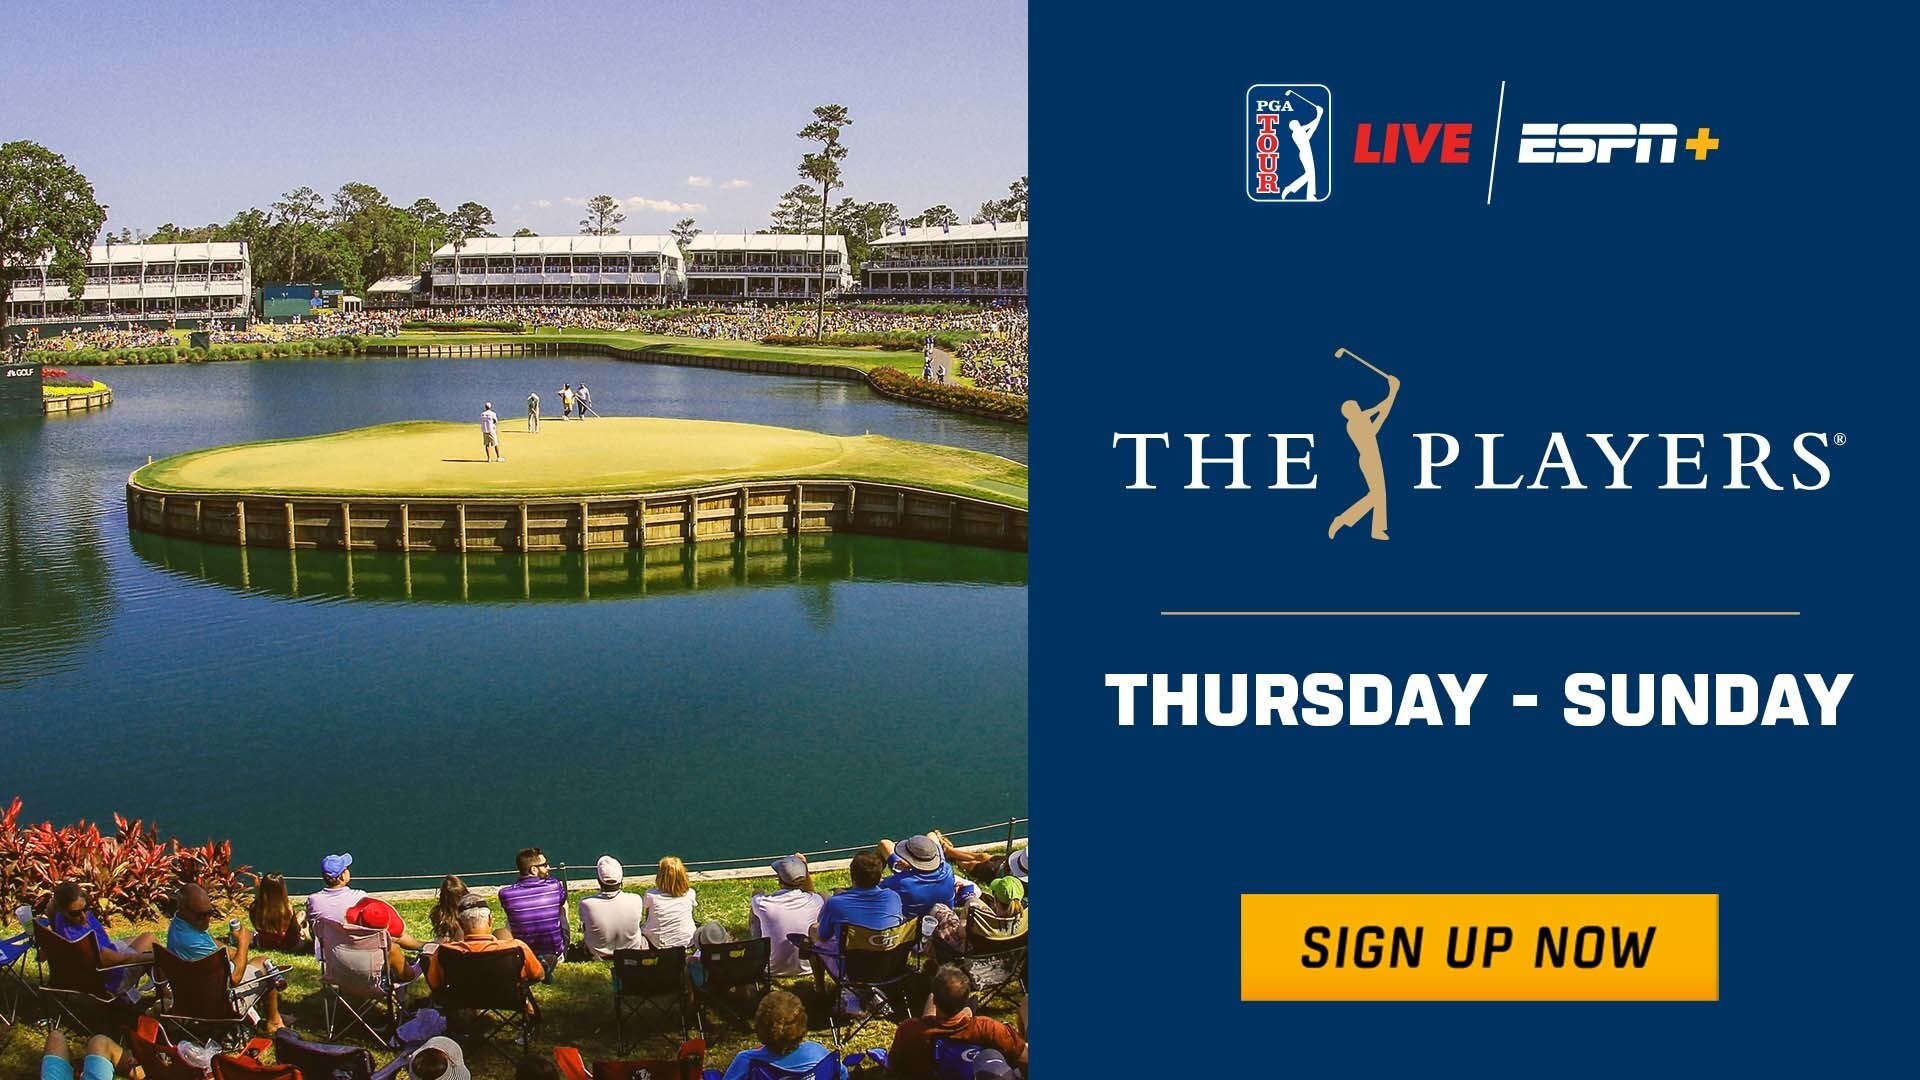 PGA TOUR LIVE Exclusively on ESPN+: More Shots, More Players, More Feeds at THE PLAYERS Championship Starting Tuesday, March 8, from TPC Sawgrass in Ponte Vedra Beach, Florida